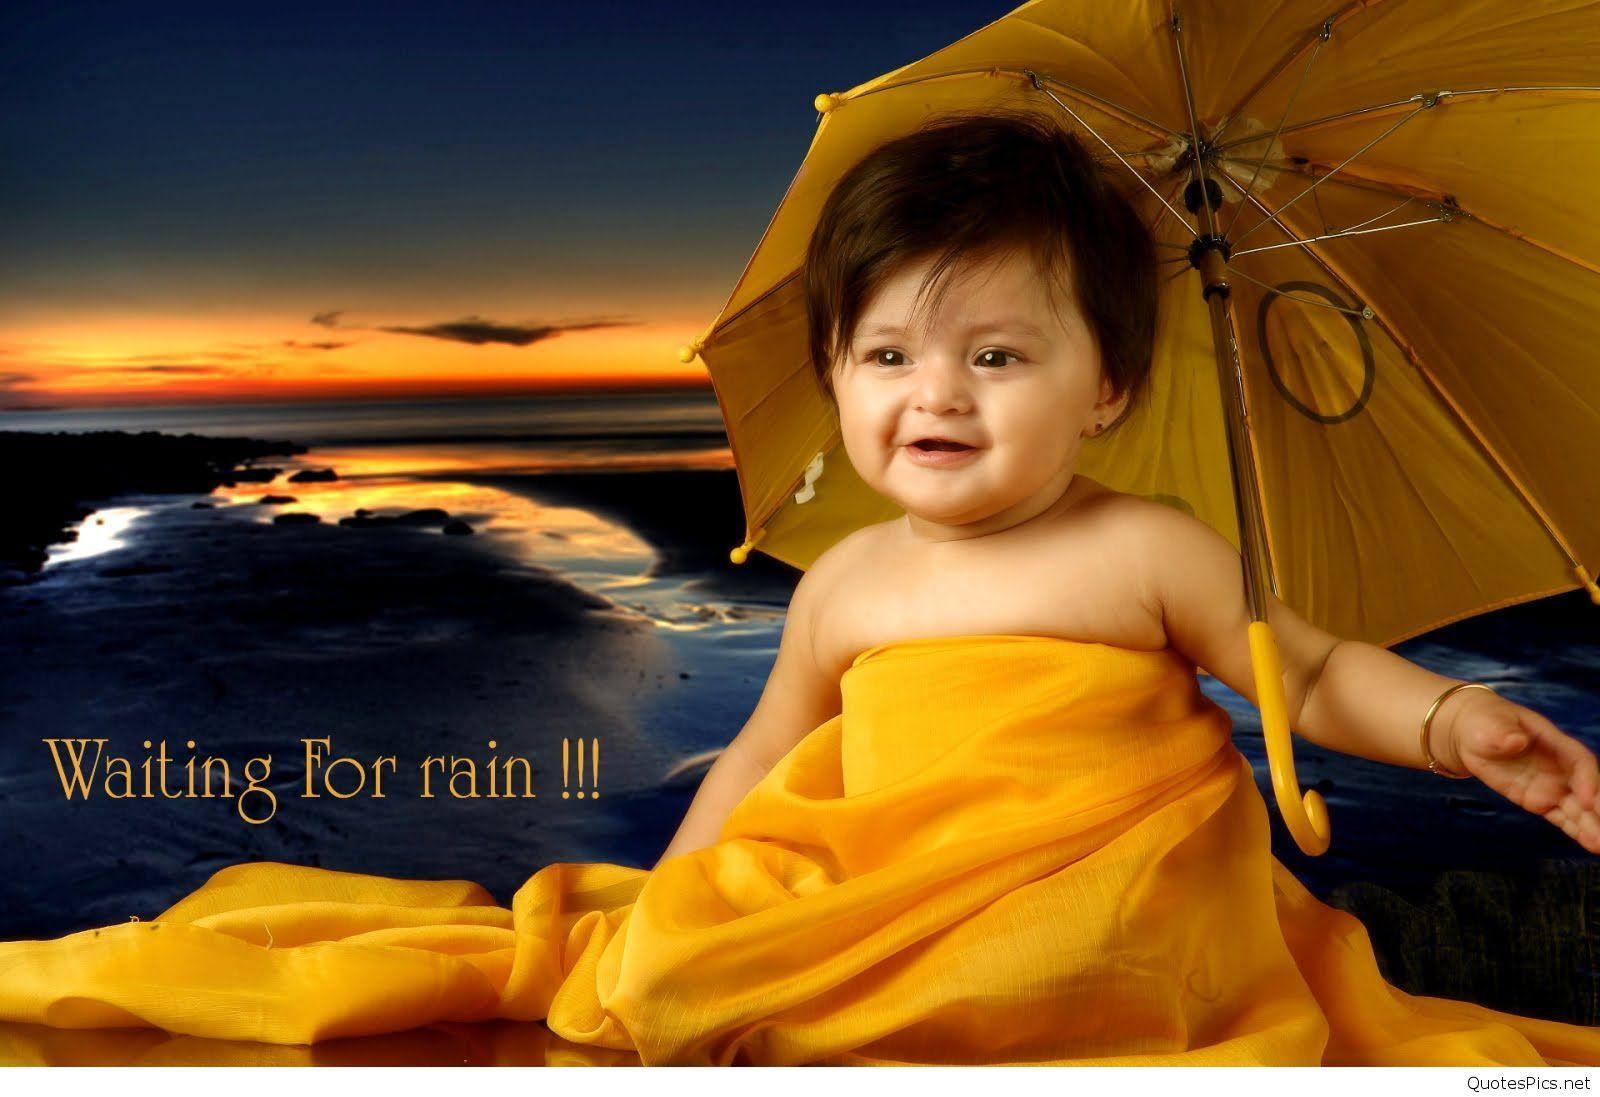 Cute Baby Boy Image, Photo, Picture and Wallpaper